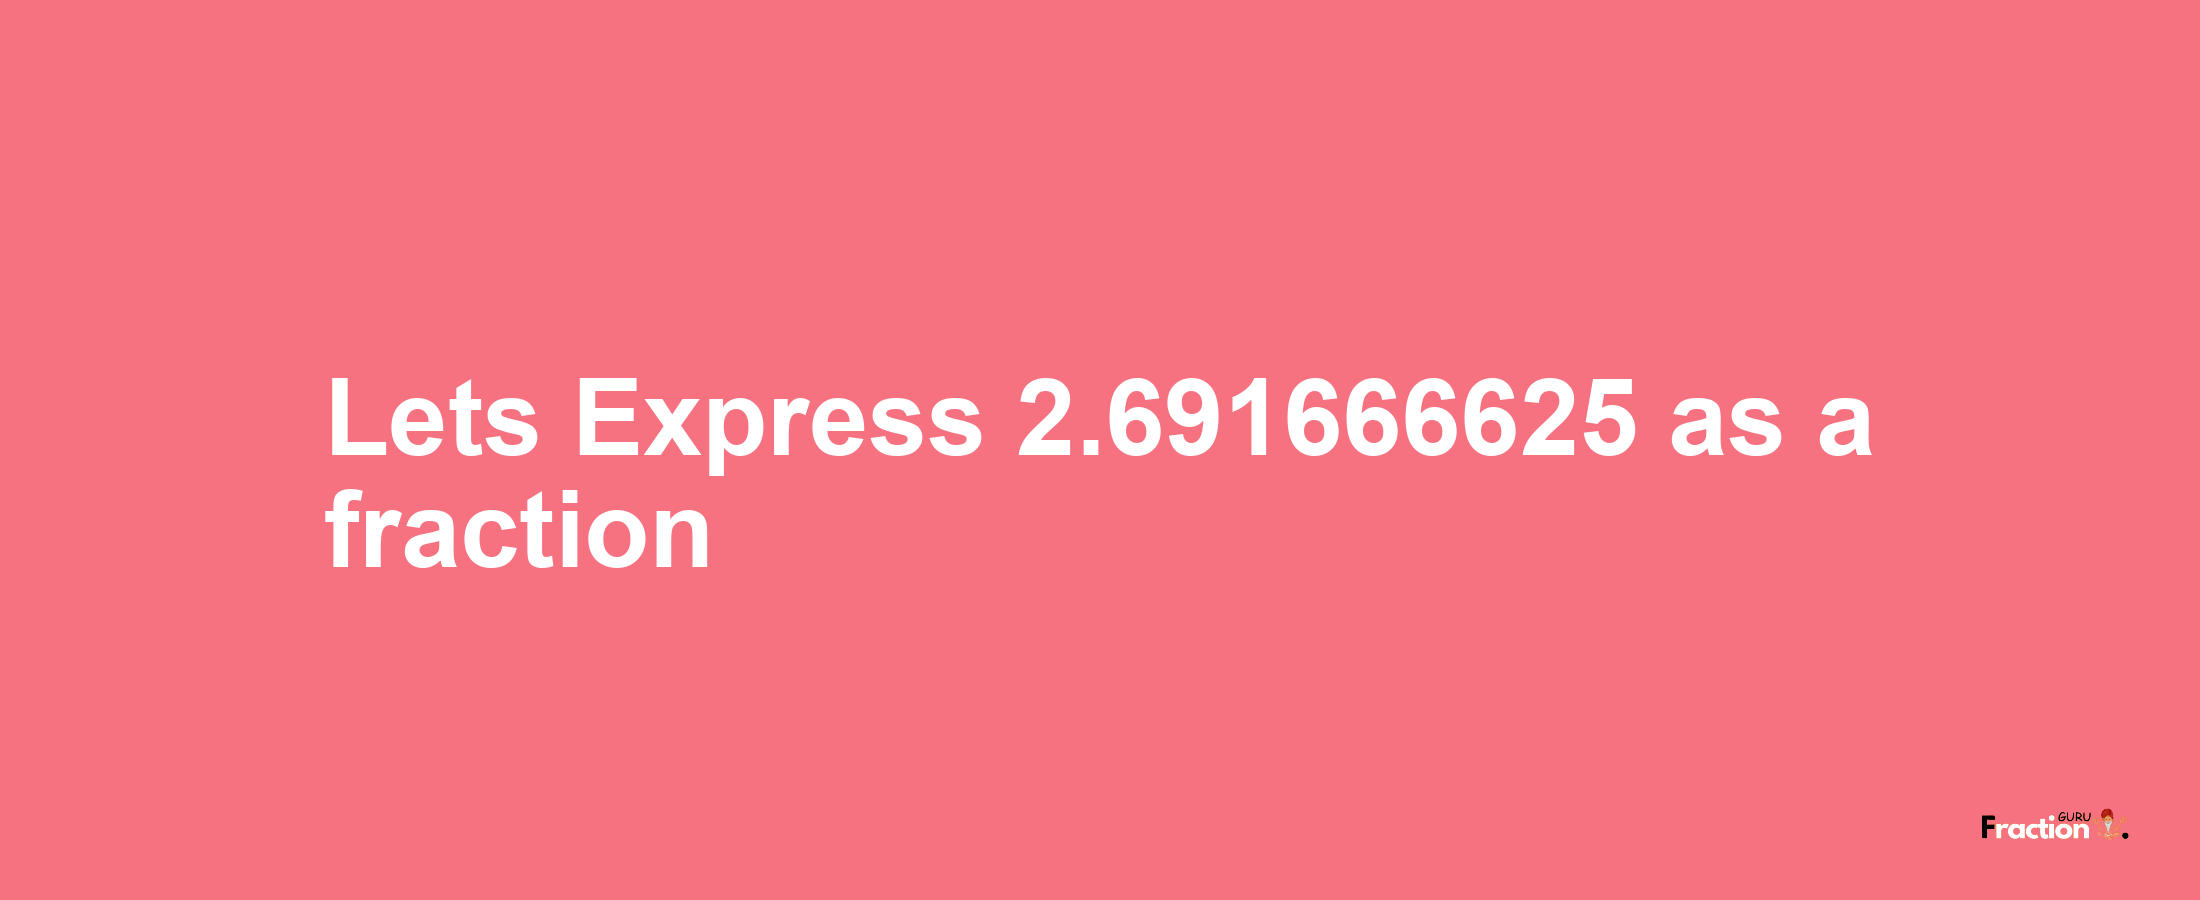 Lets Express 2.691666625 as afraction